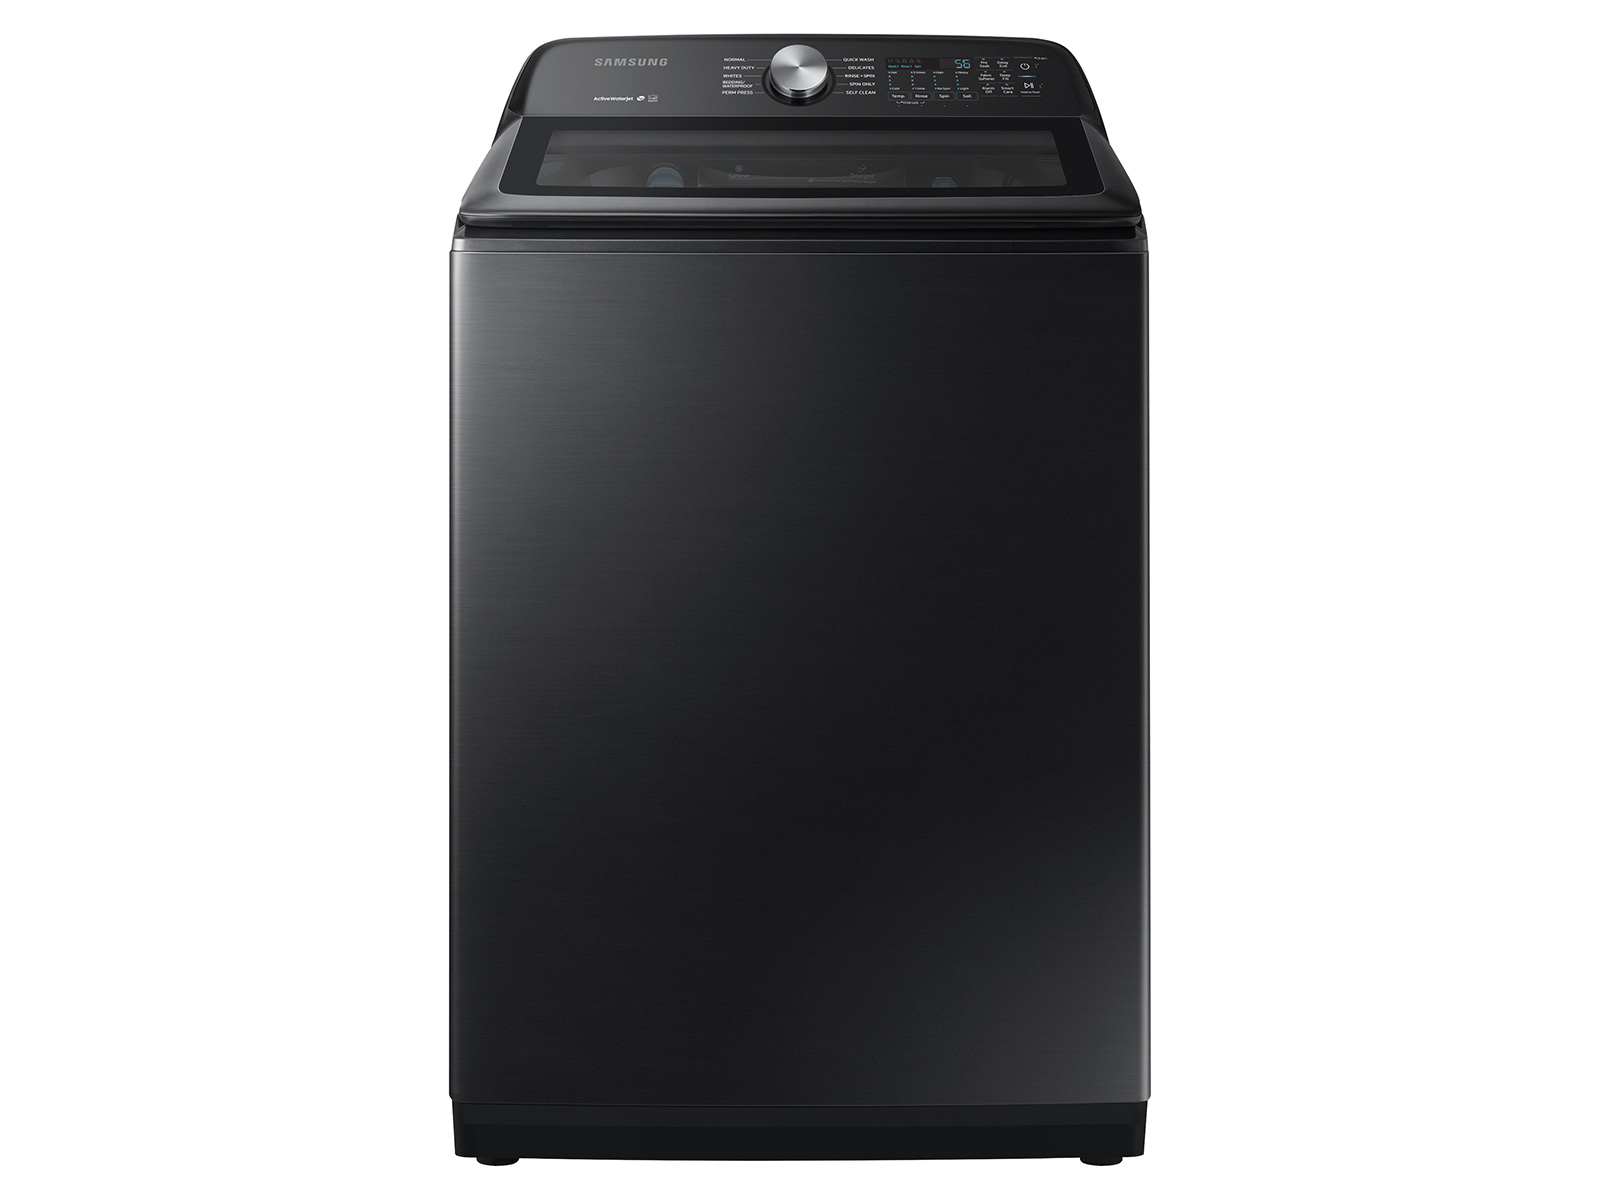 Photos - Washing Machine Samsung 5.0 cu. ft. Capacity Top Load Washer with Active WaterJet in Brush 